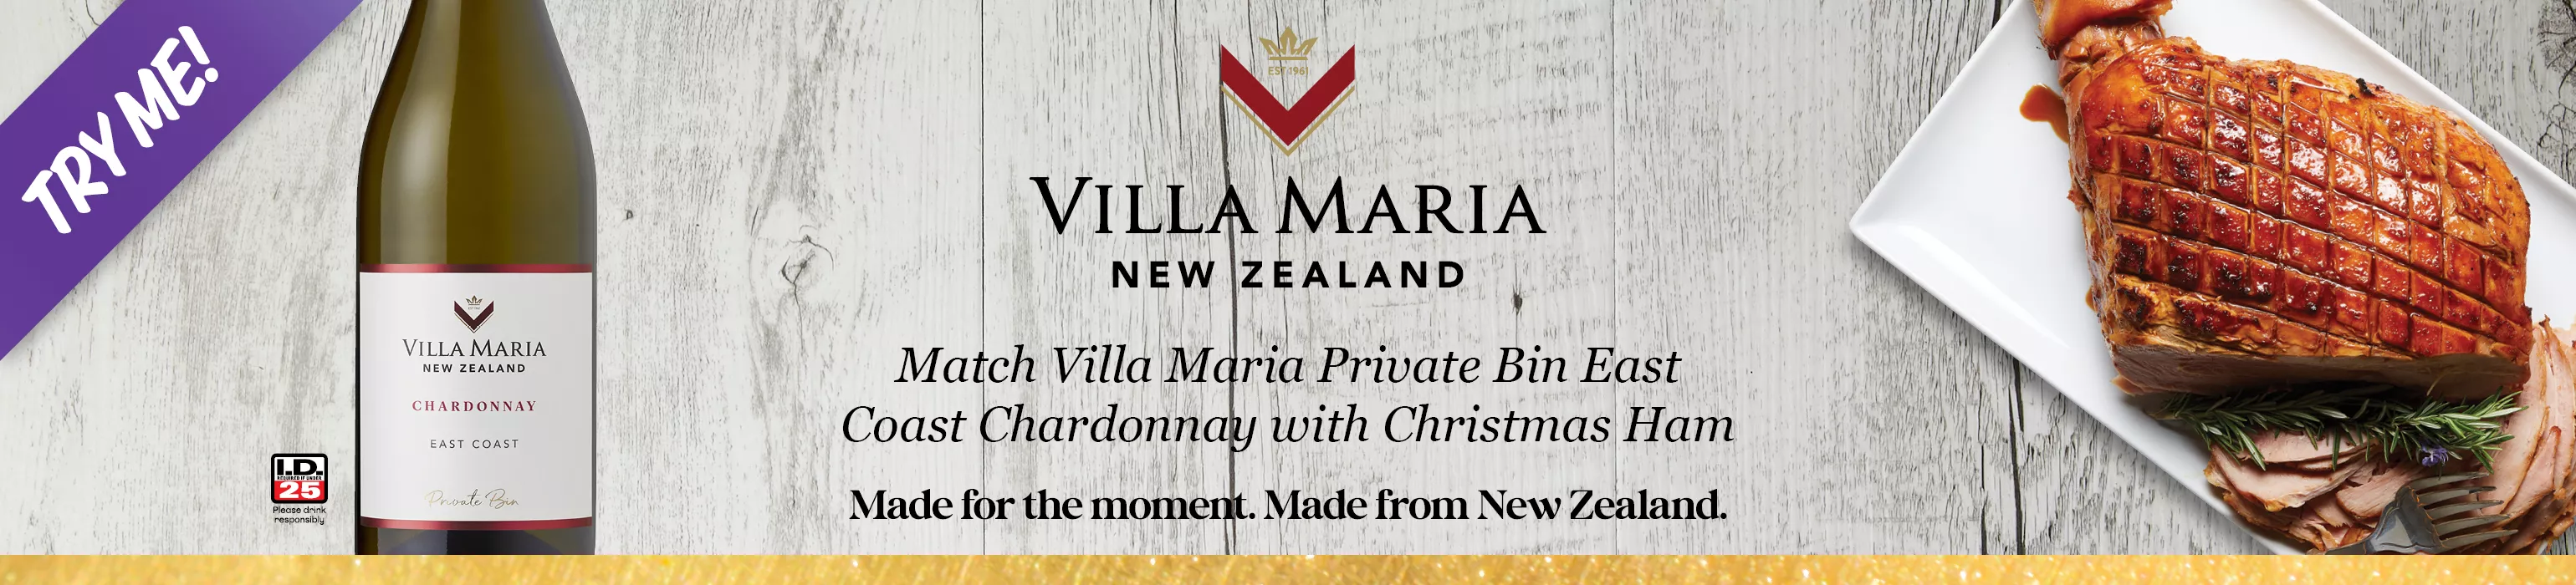 Made for the moment - Made from NZ, Villa Maria Wines Try Me